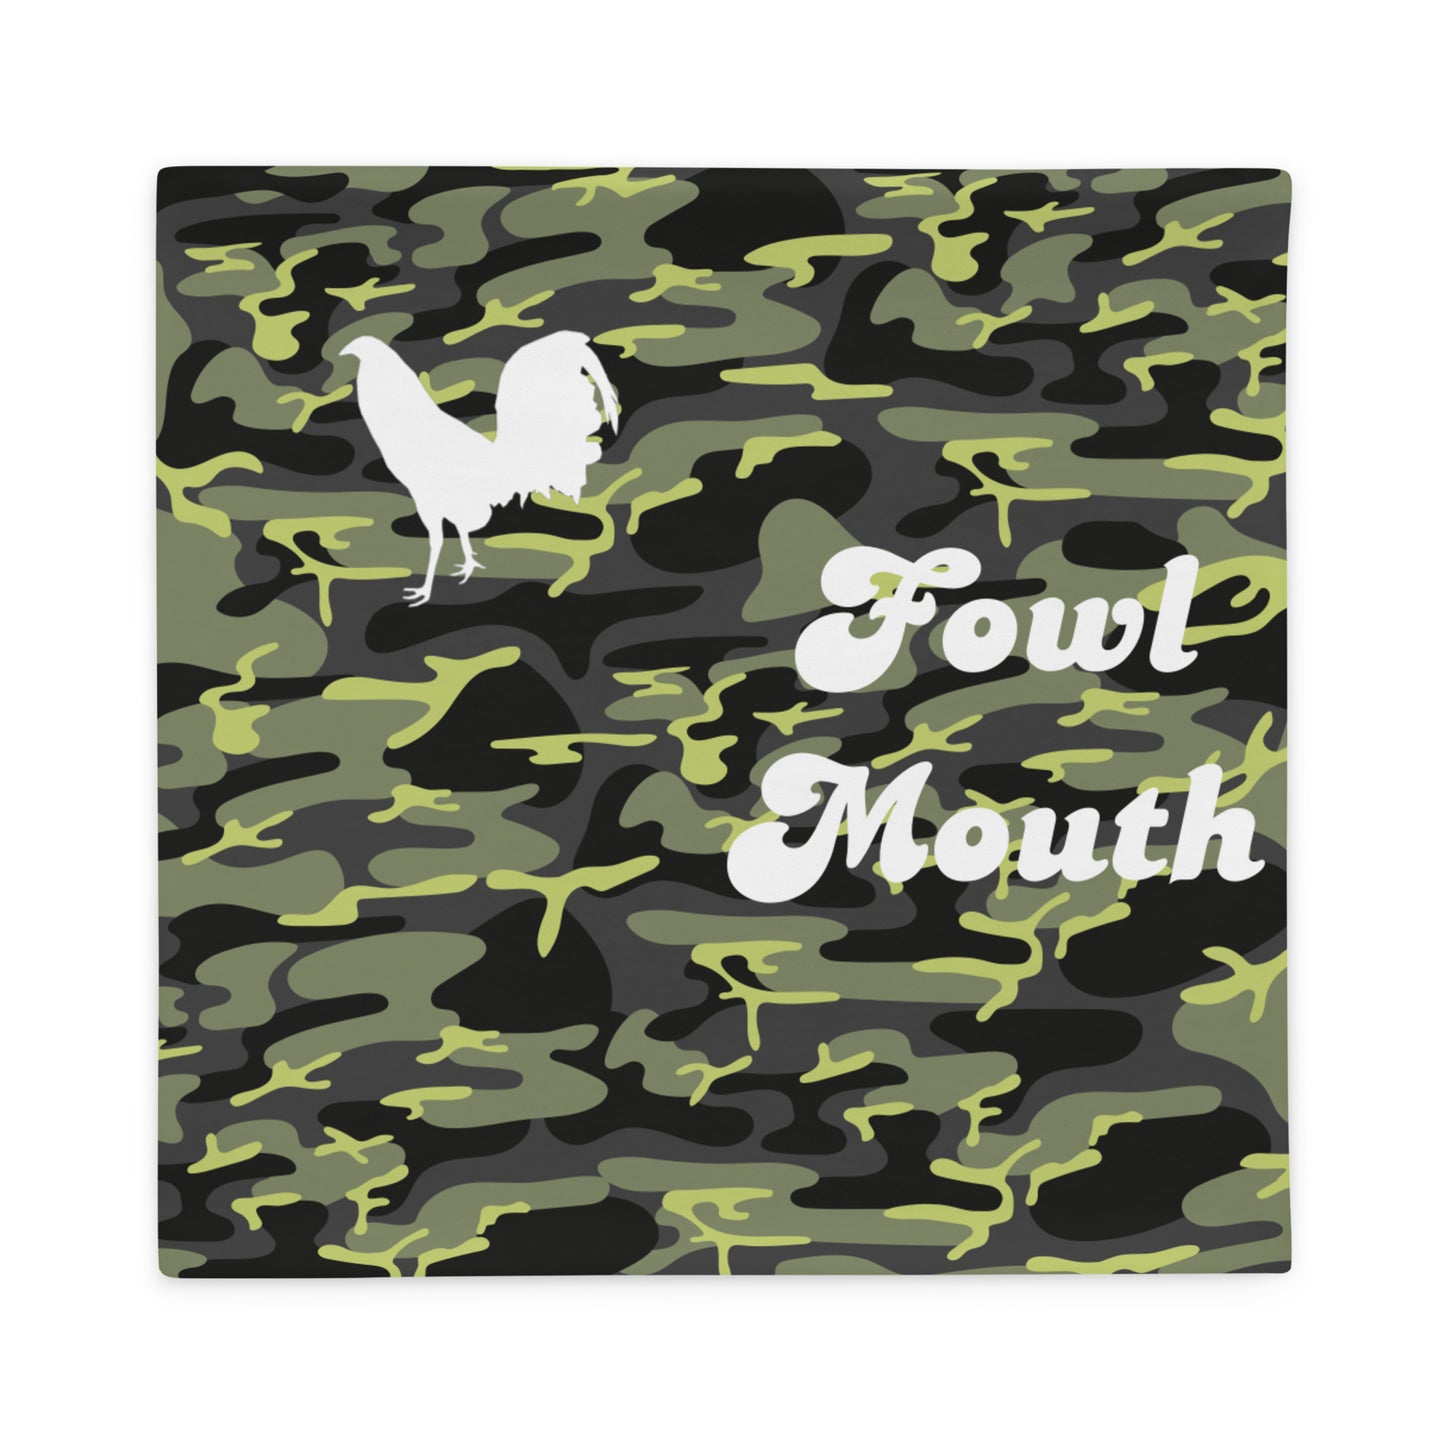 Fowl Mouth Collection Dark Camo Gamefowl Rooster Pillow Case